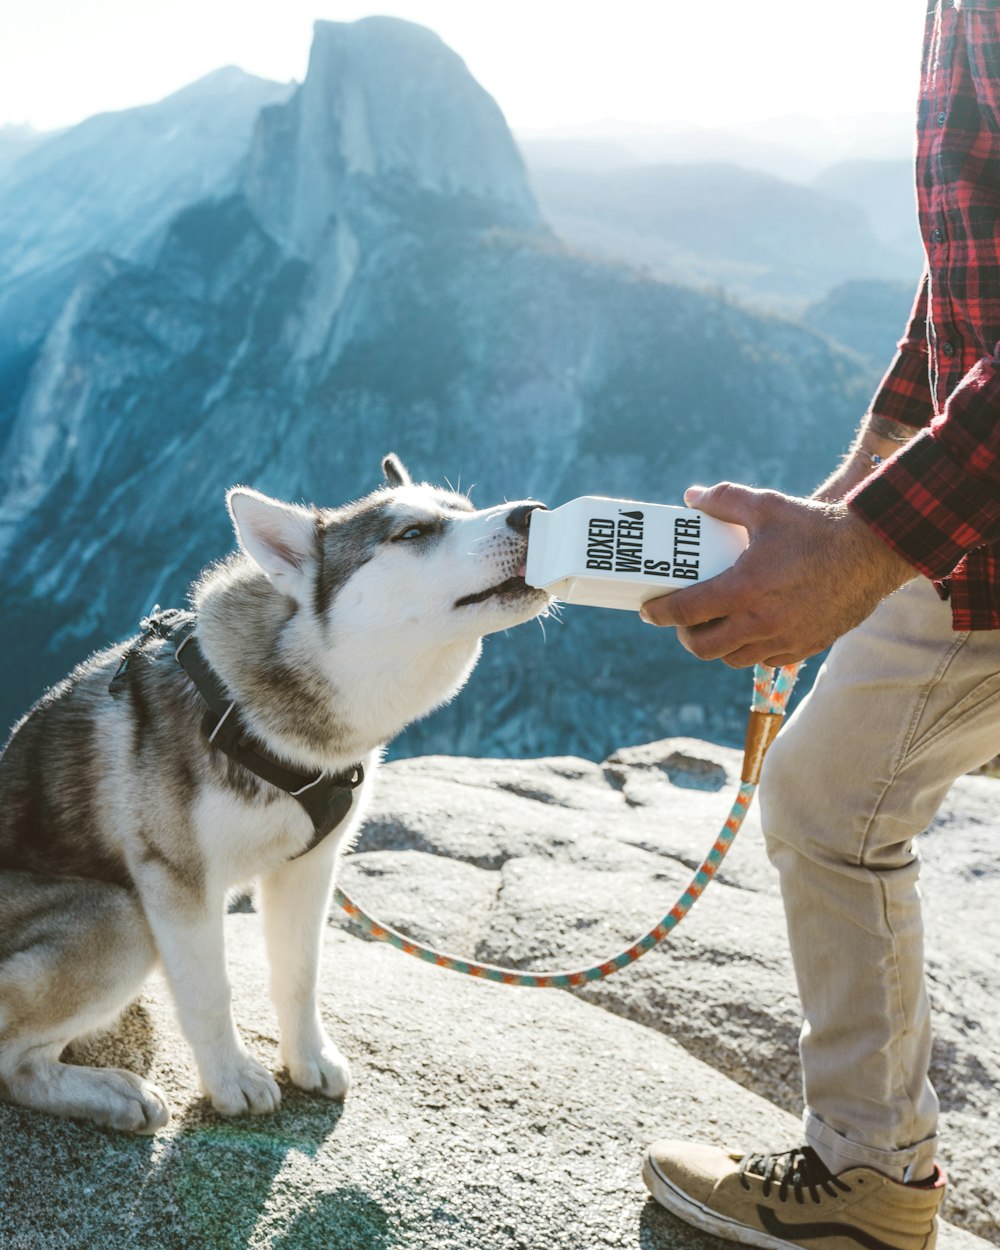 A gray and white husky drinking water out of a Boxed Water carton